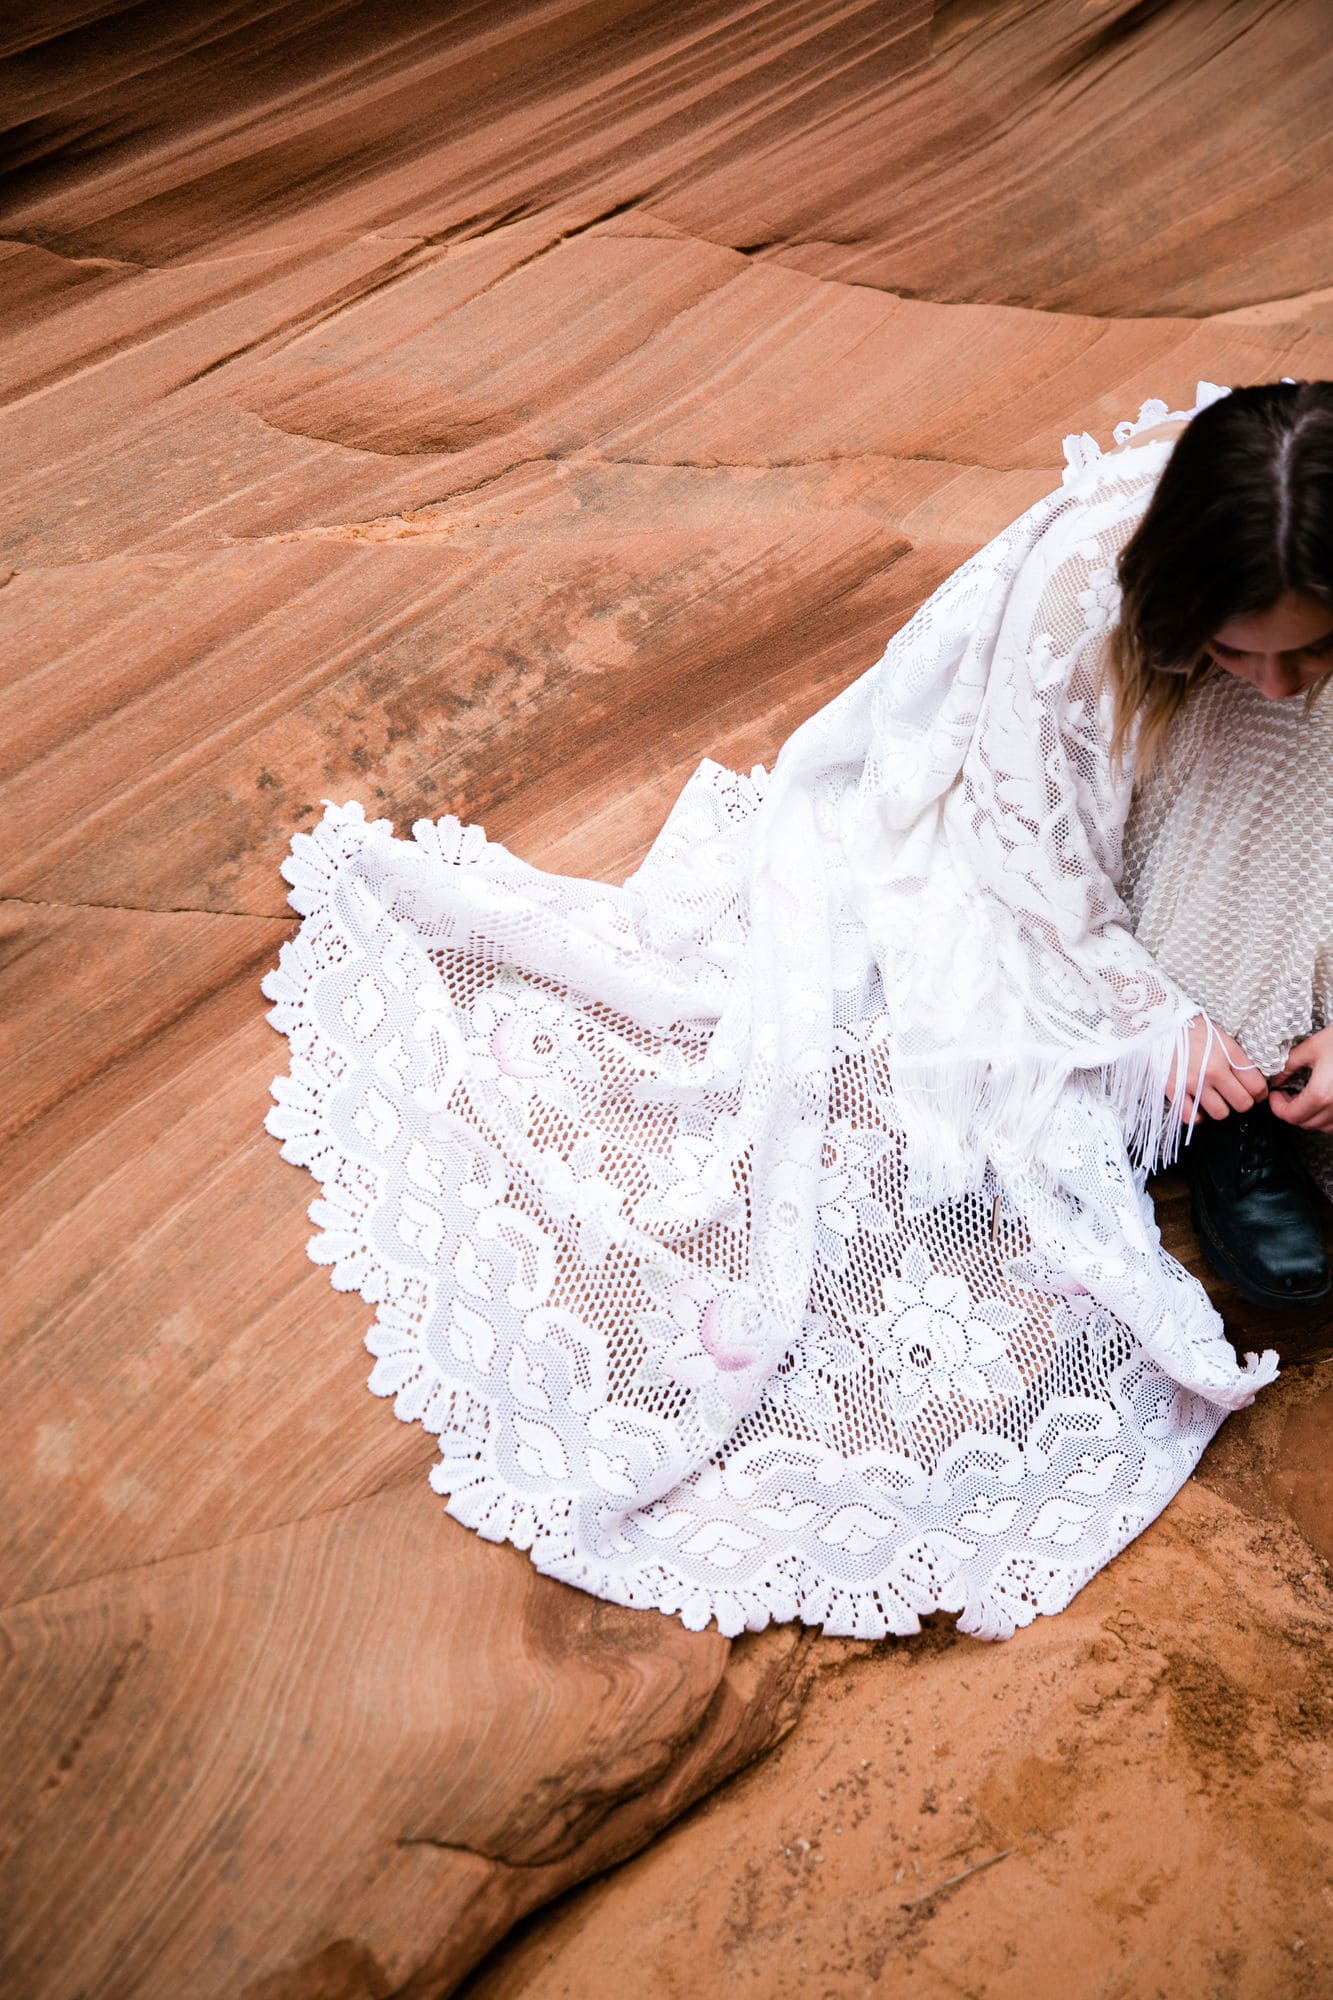 During her elopement in Arizona a bride ties her boots. Her lace dress fans out beside her, stark white against the red rock of the canyon.